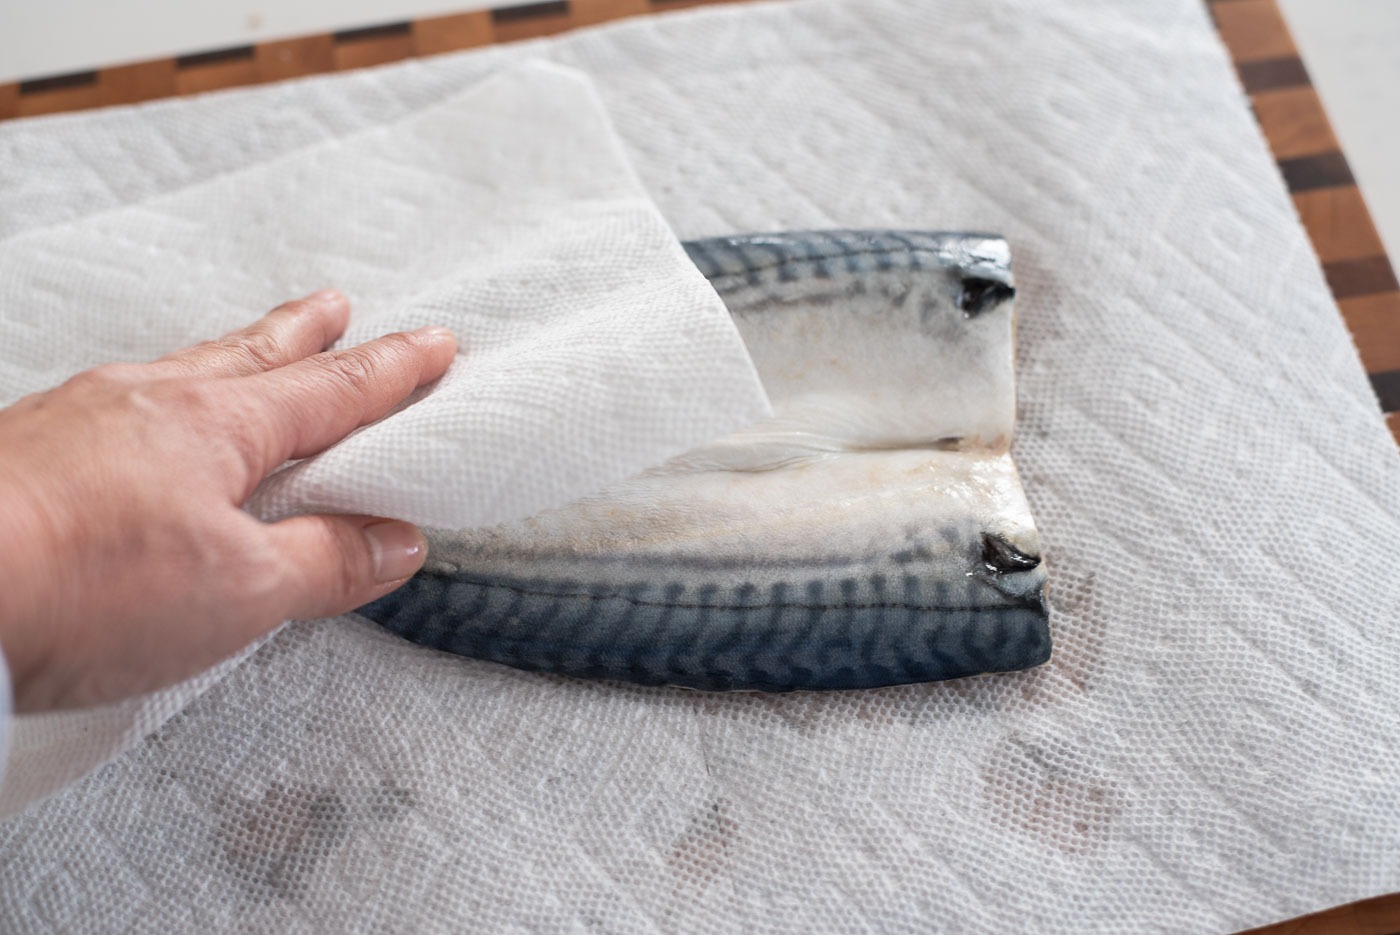 A piece of paper towel is used to wipe off the remaining moisture of mackerel filletss